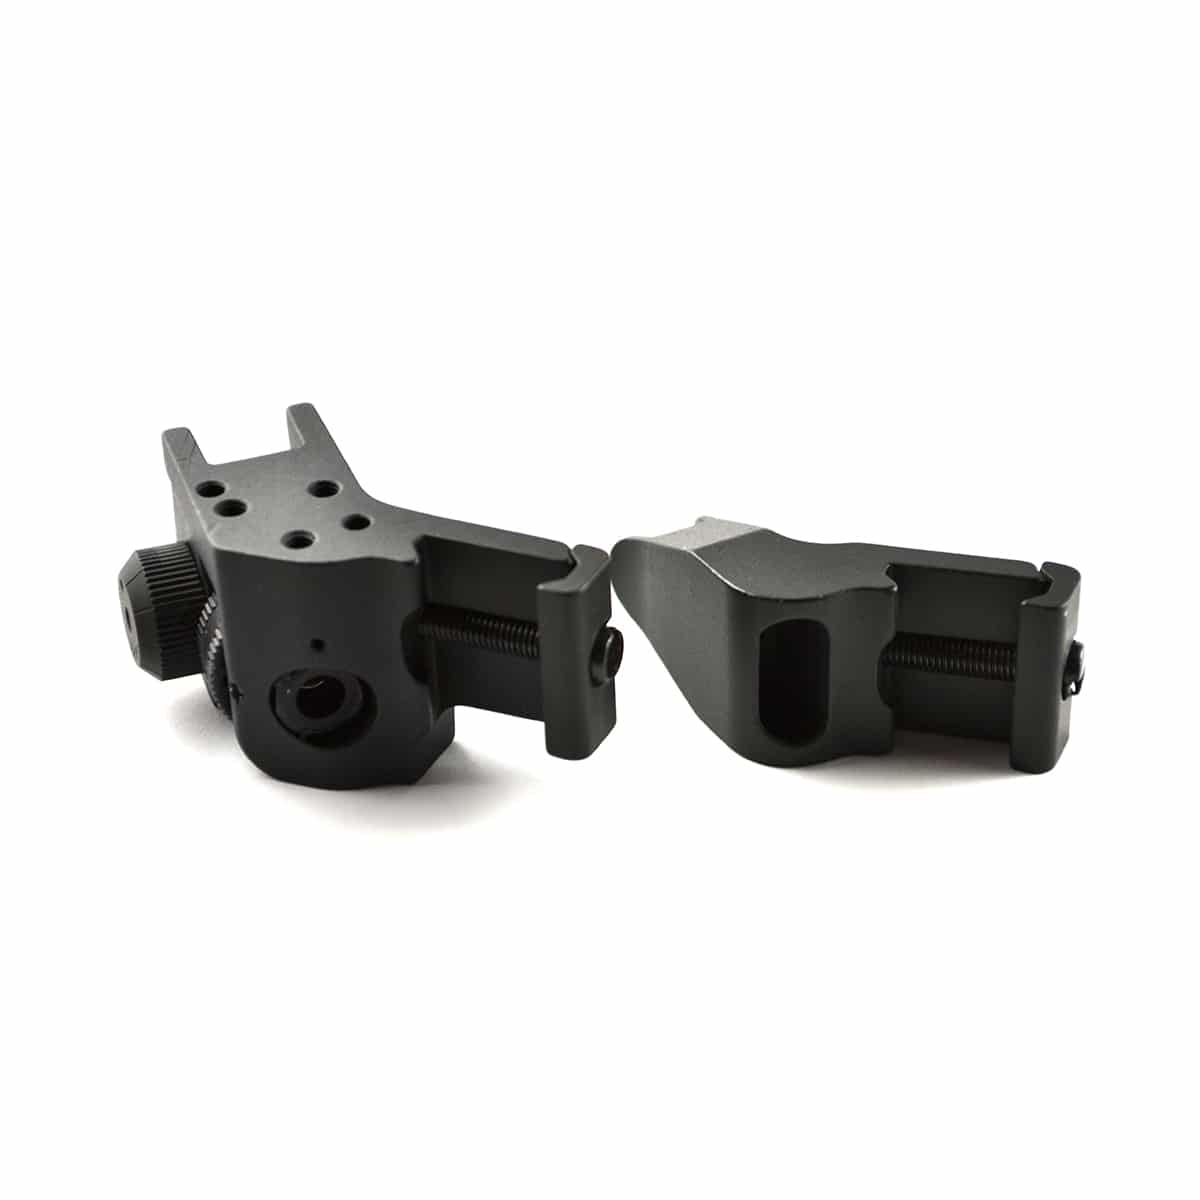 Green Blob Front and Rear 45 Degree Rapid Transition BUIS Backup Iron Sights 